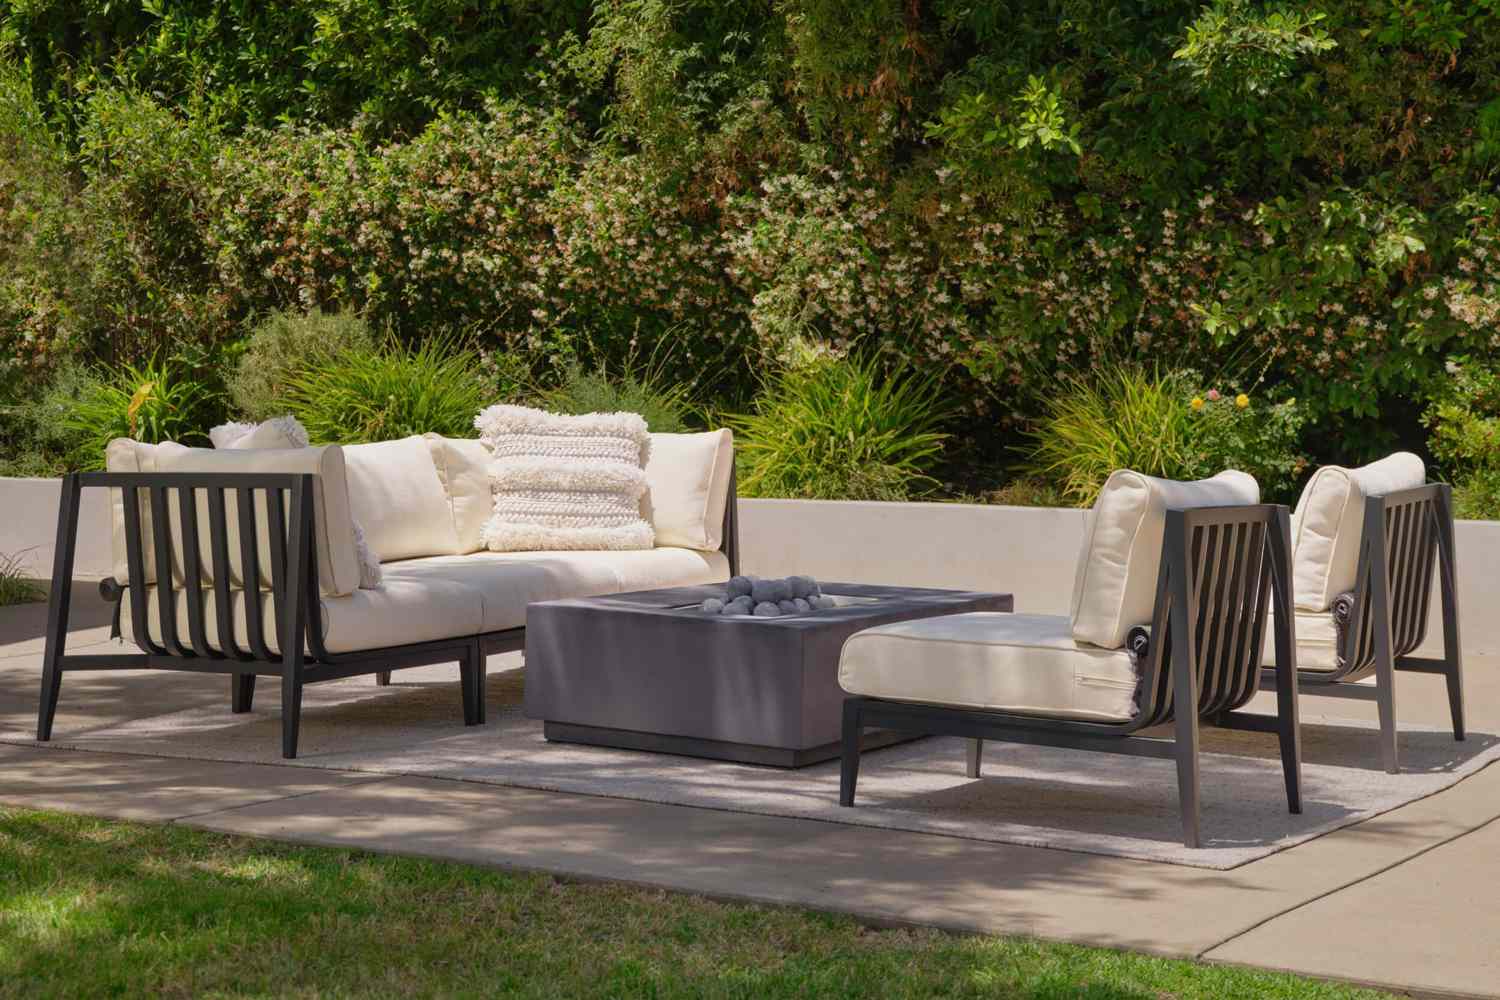 Patio Chair Alternatives for Relaxation: Discover the Ultimate Seats